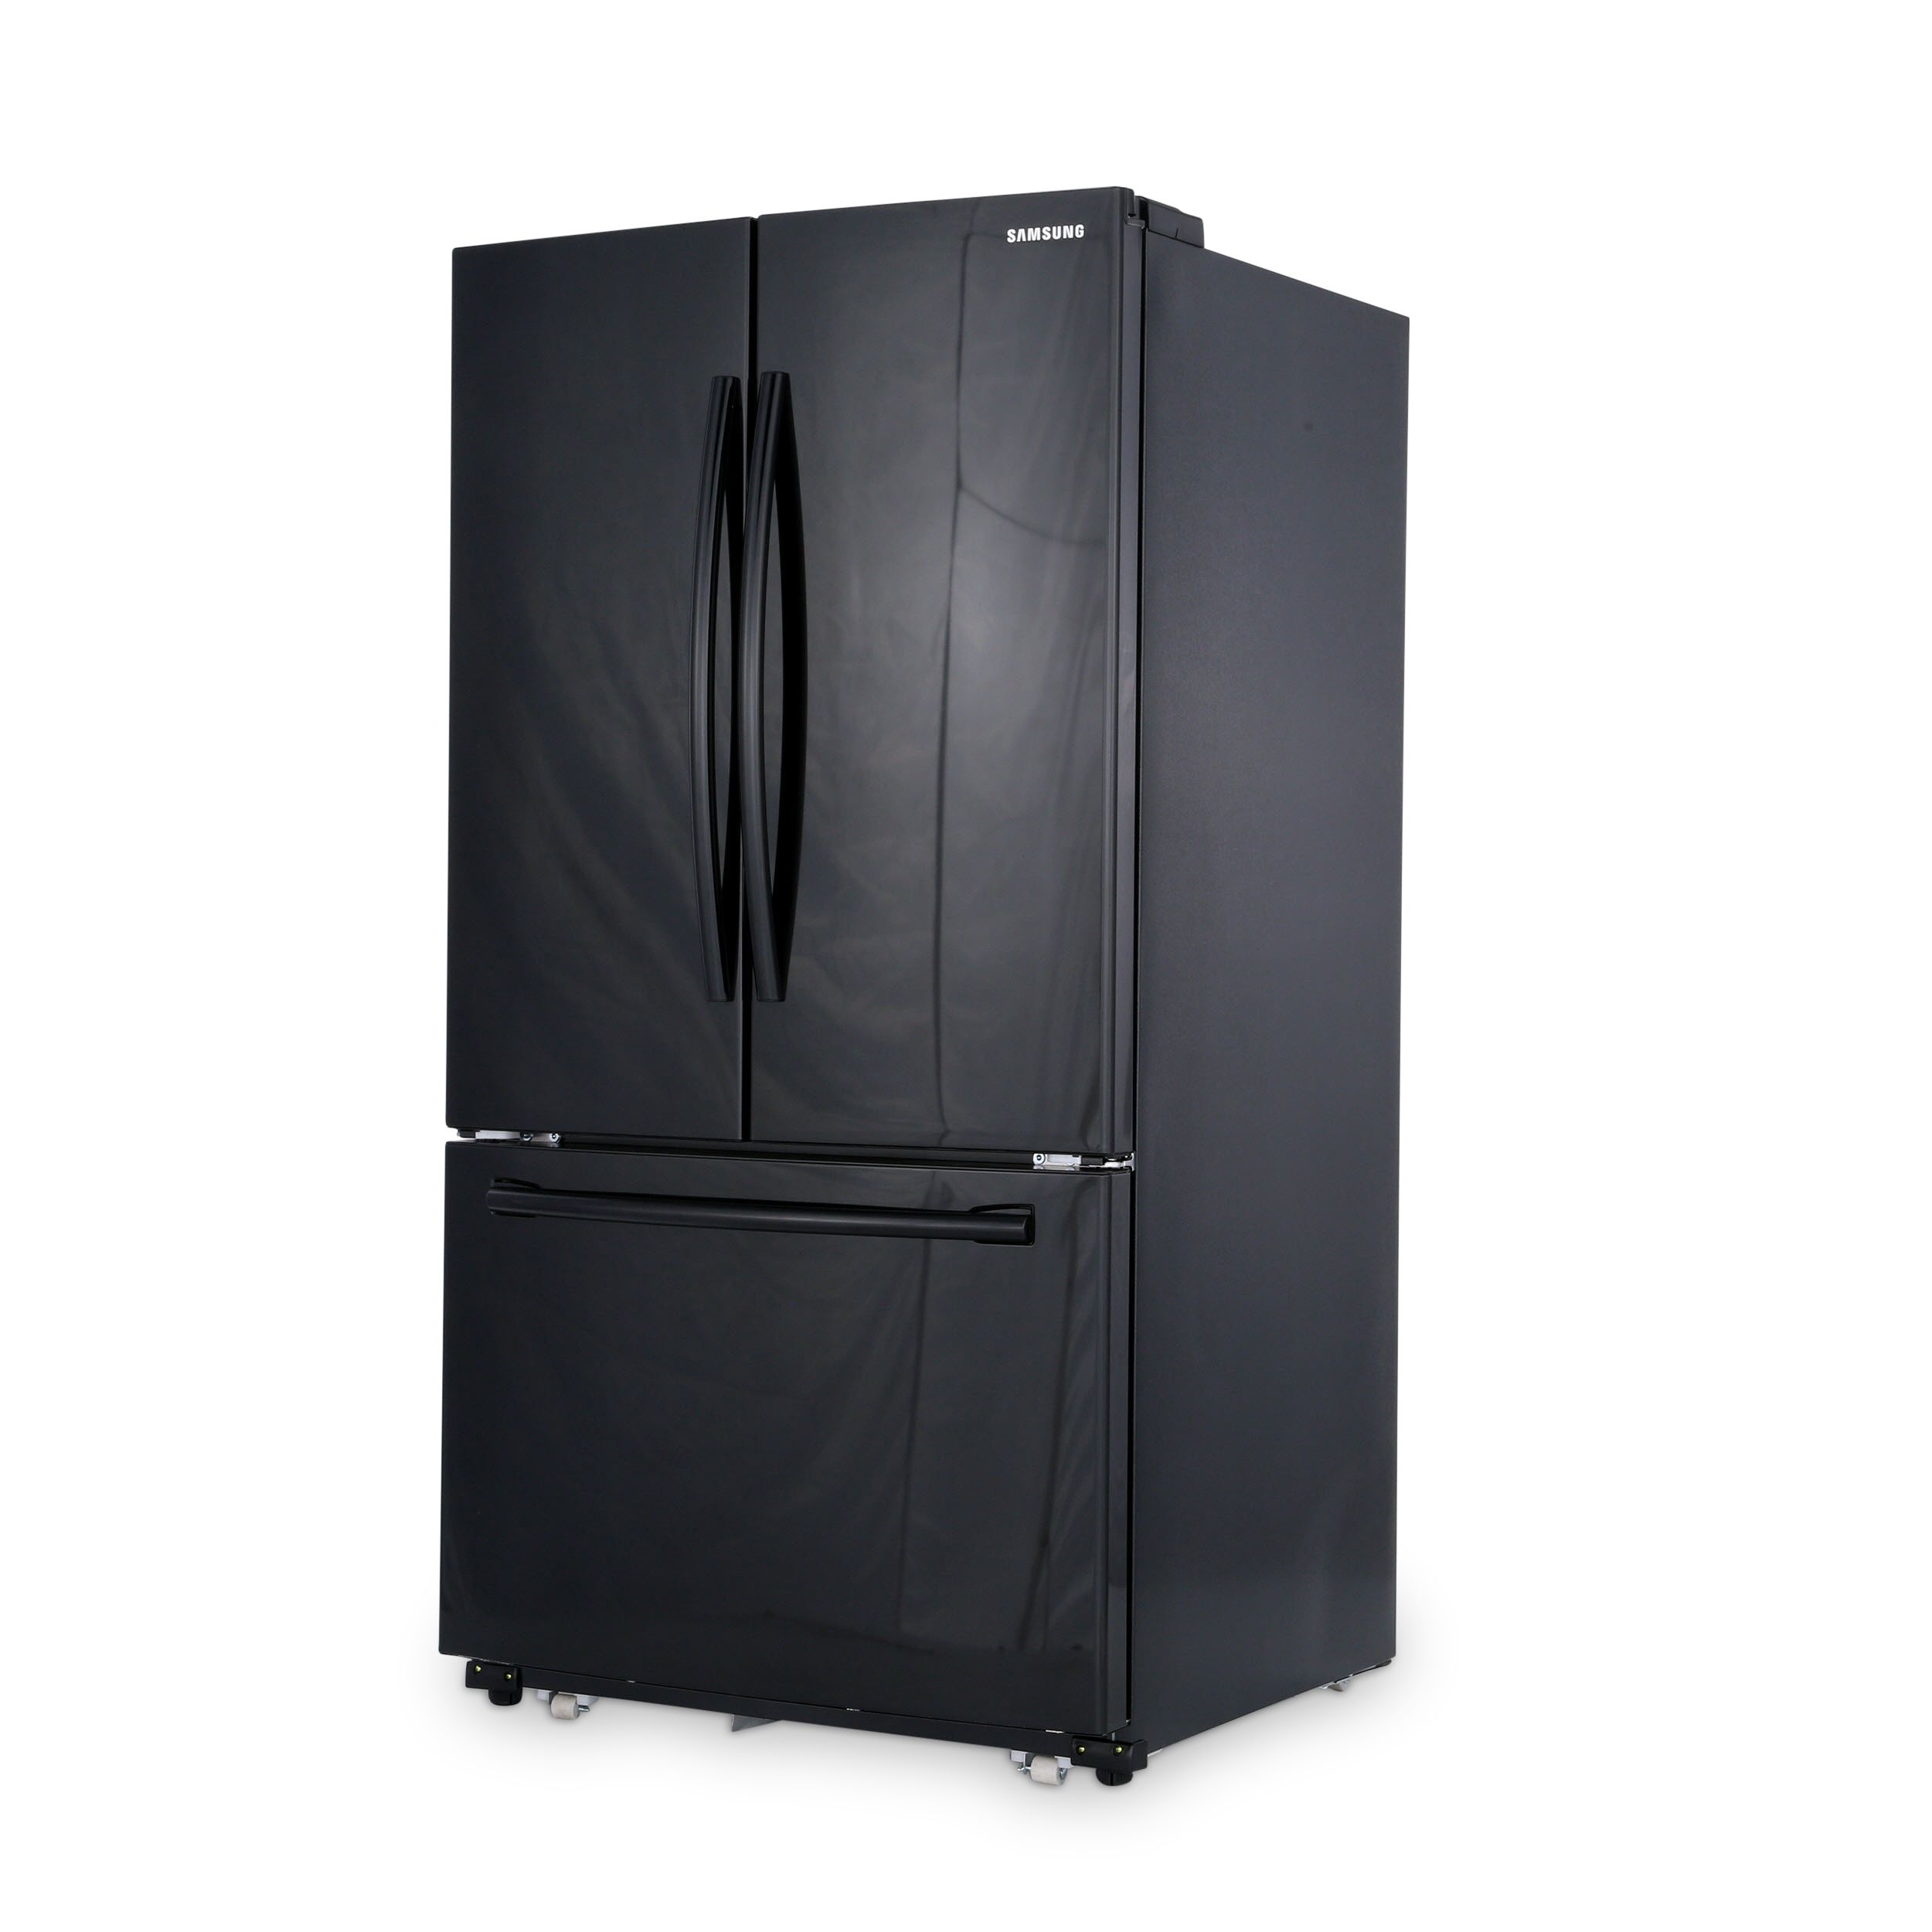 Samsung  ft French Door Refrigerator with Ice Maker (Black) ENERGY  STAR at 